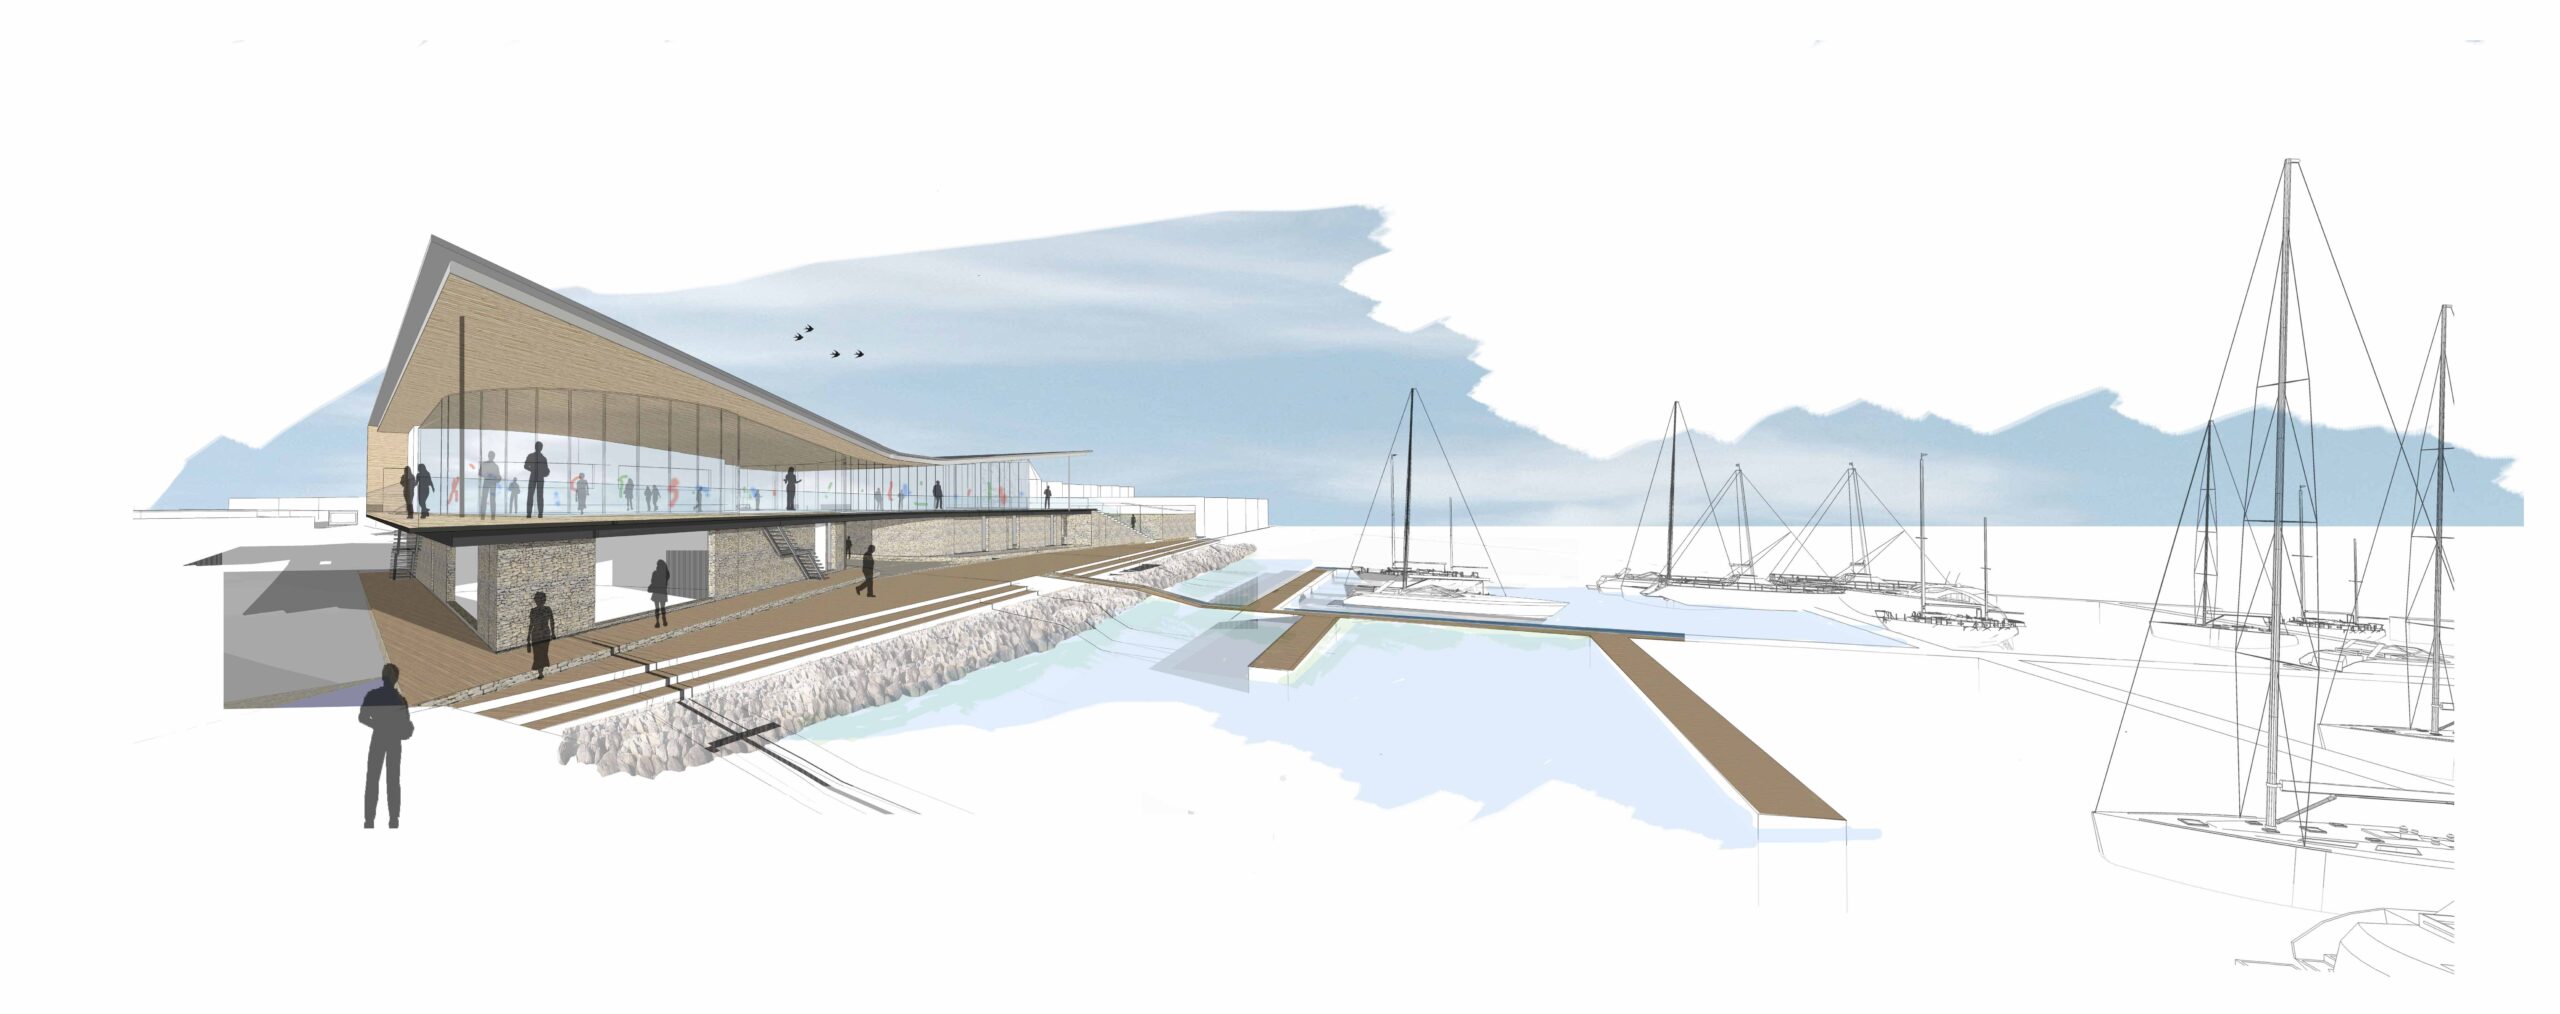 concept of main entrance to yacht club with large glass windows overlooking the jetty and harbour